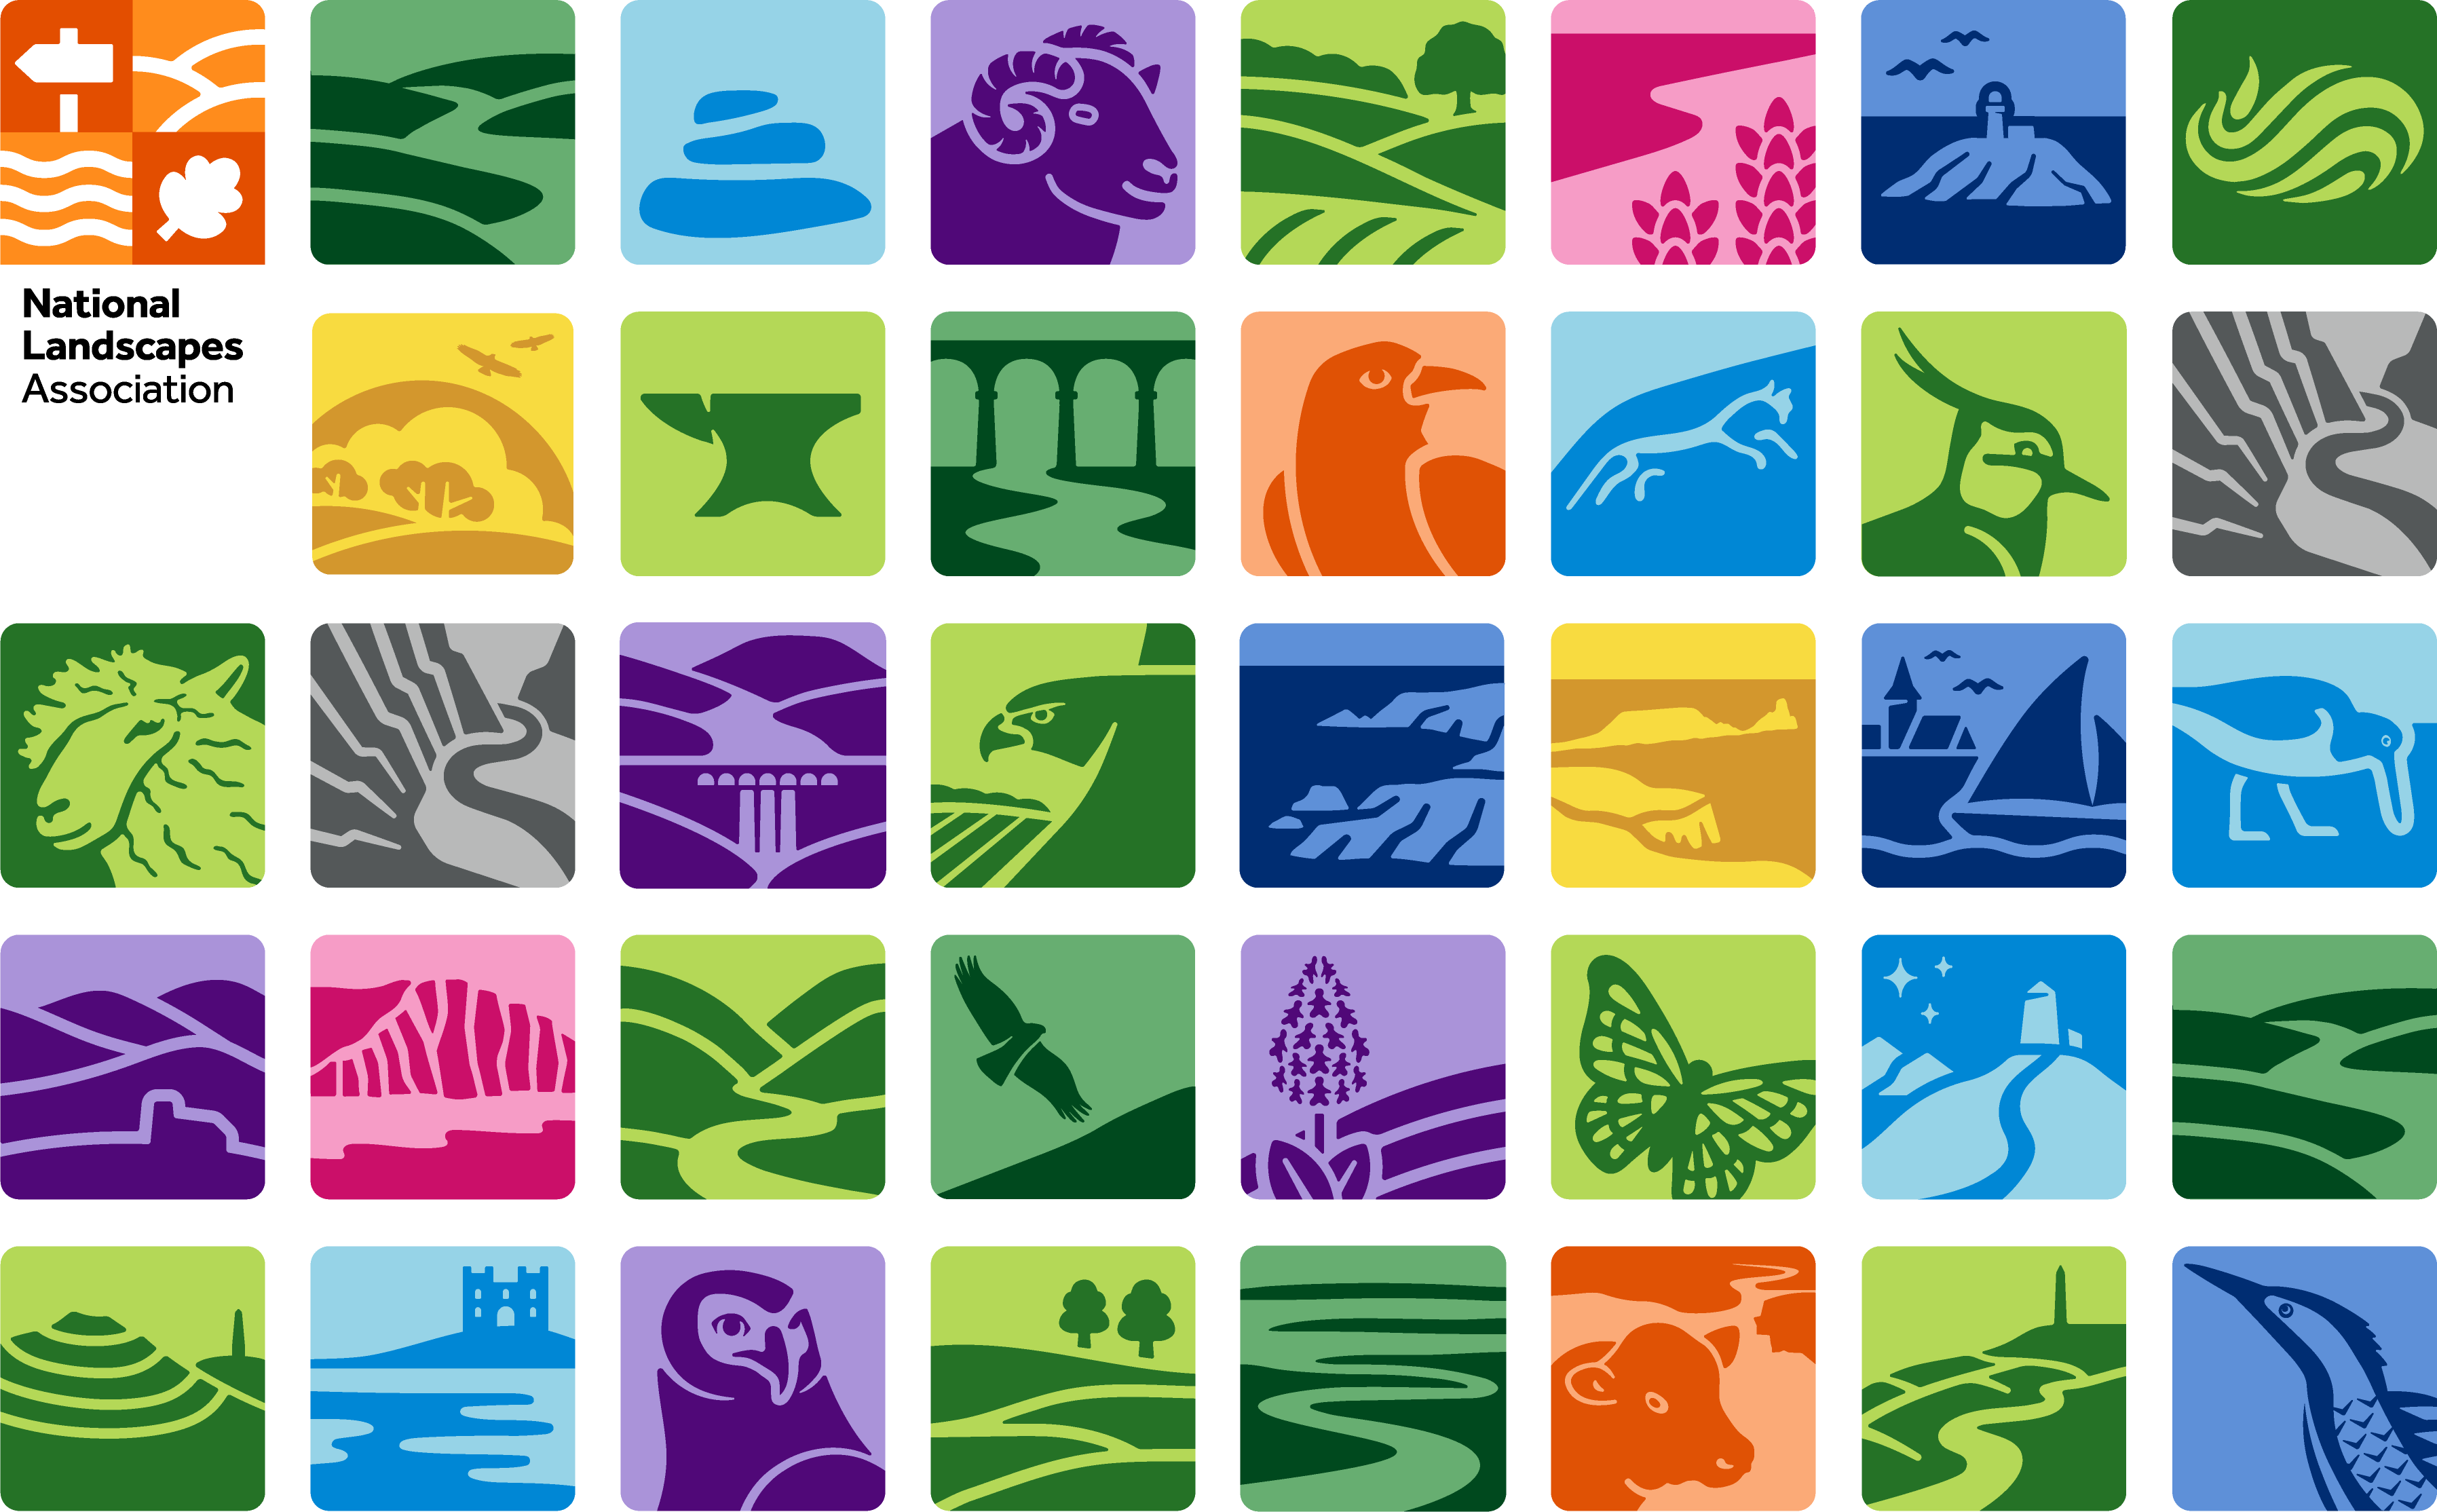 A patchwork of new logos for National Landscapes